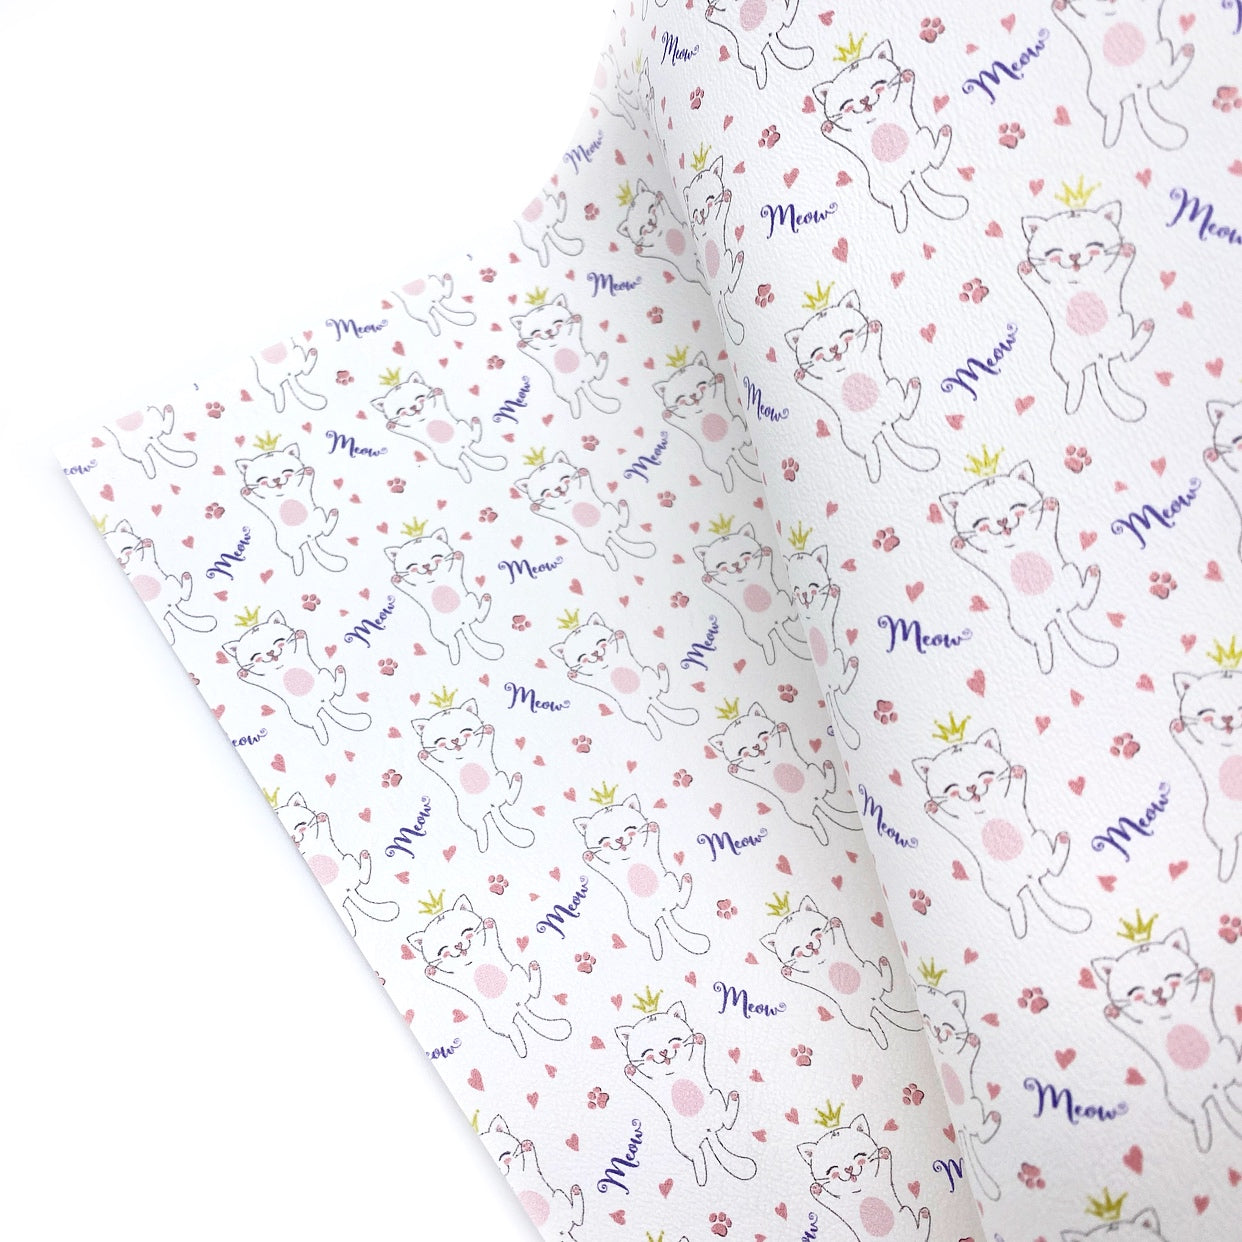 Princess Kitty Premium Faux Leather Fabric Sheets